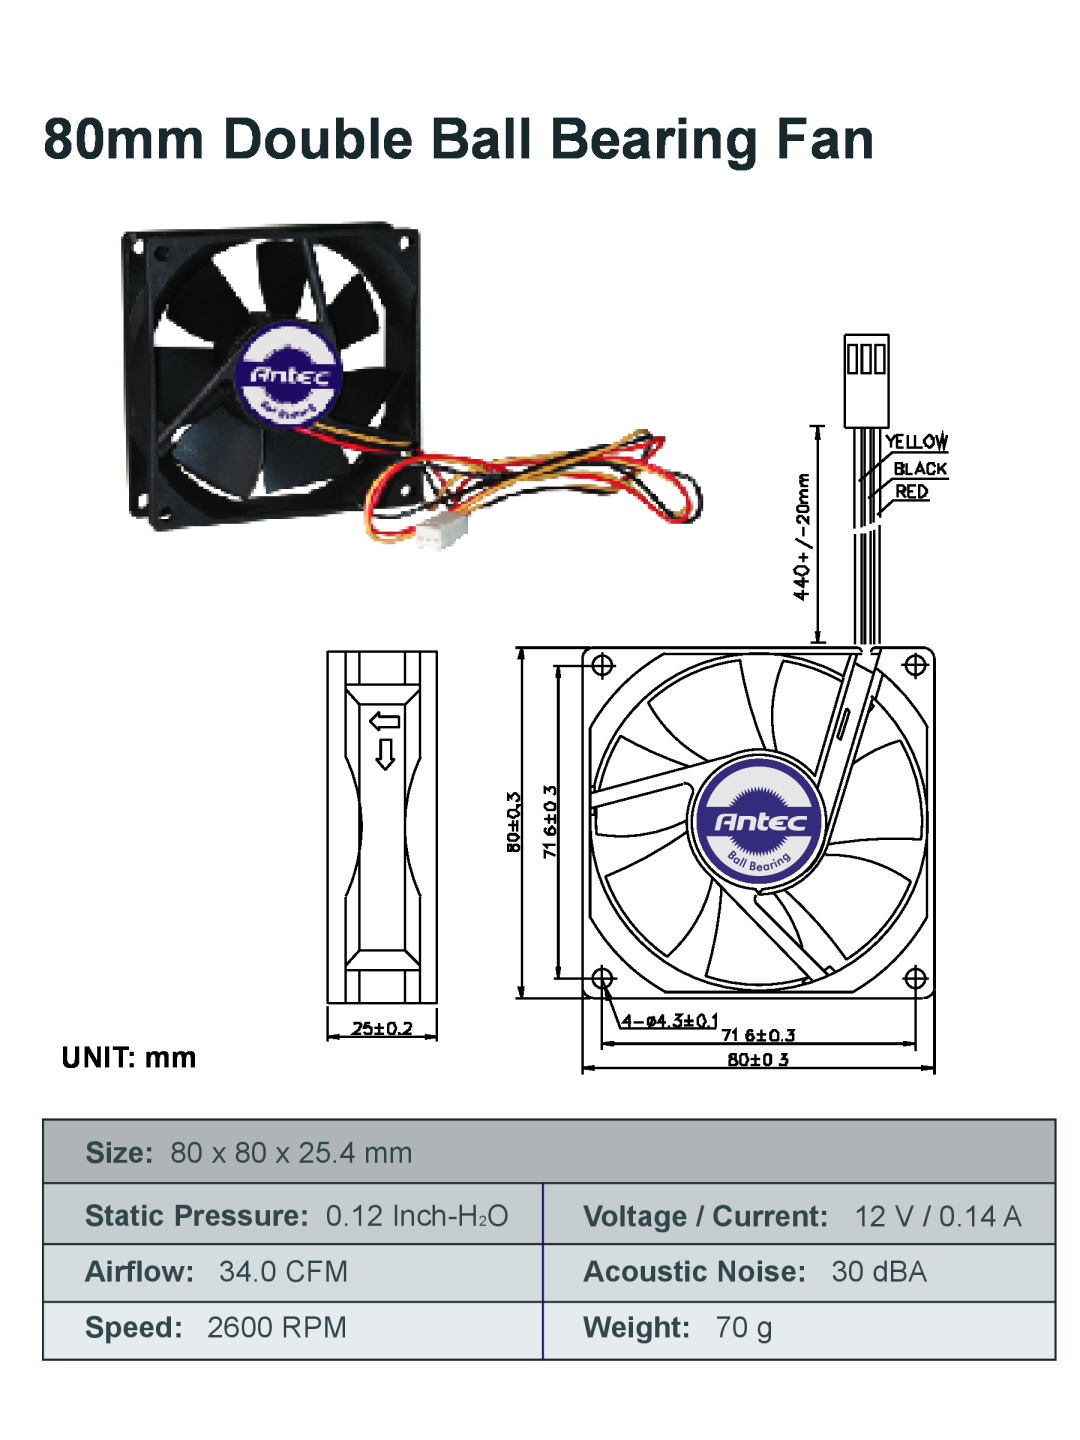 Antec manual 80mm Double Ball Bearing Fan, UNIT mm, Size 80 x 80 x 25.4 mm, Static Pressure 0.12 Inch-H2O, Airflow 